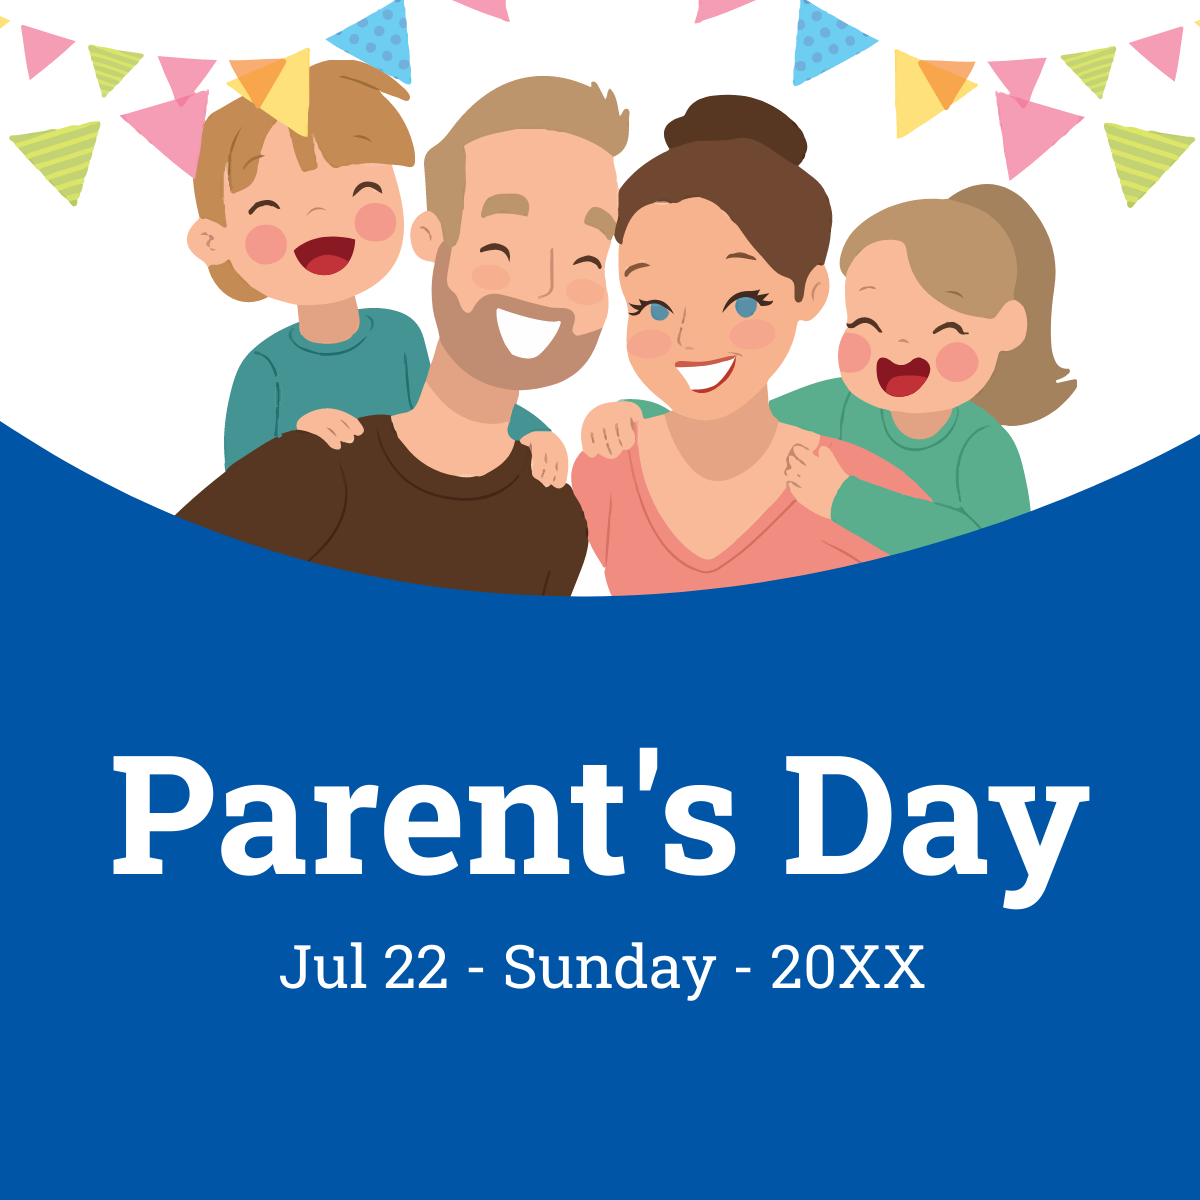 Parent's Day Twitter Profile Photo Template